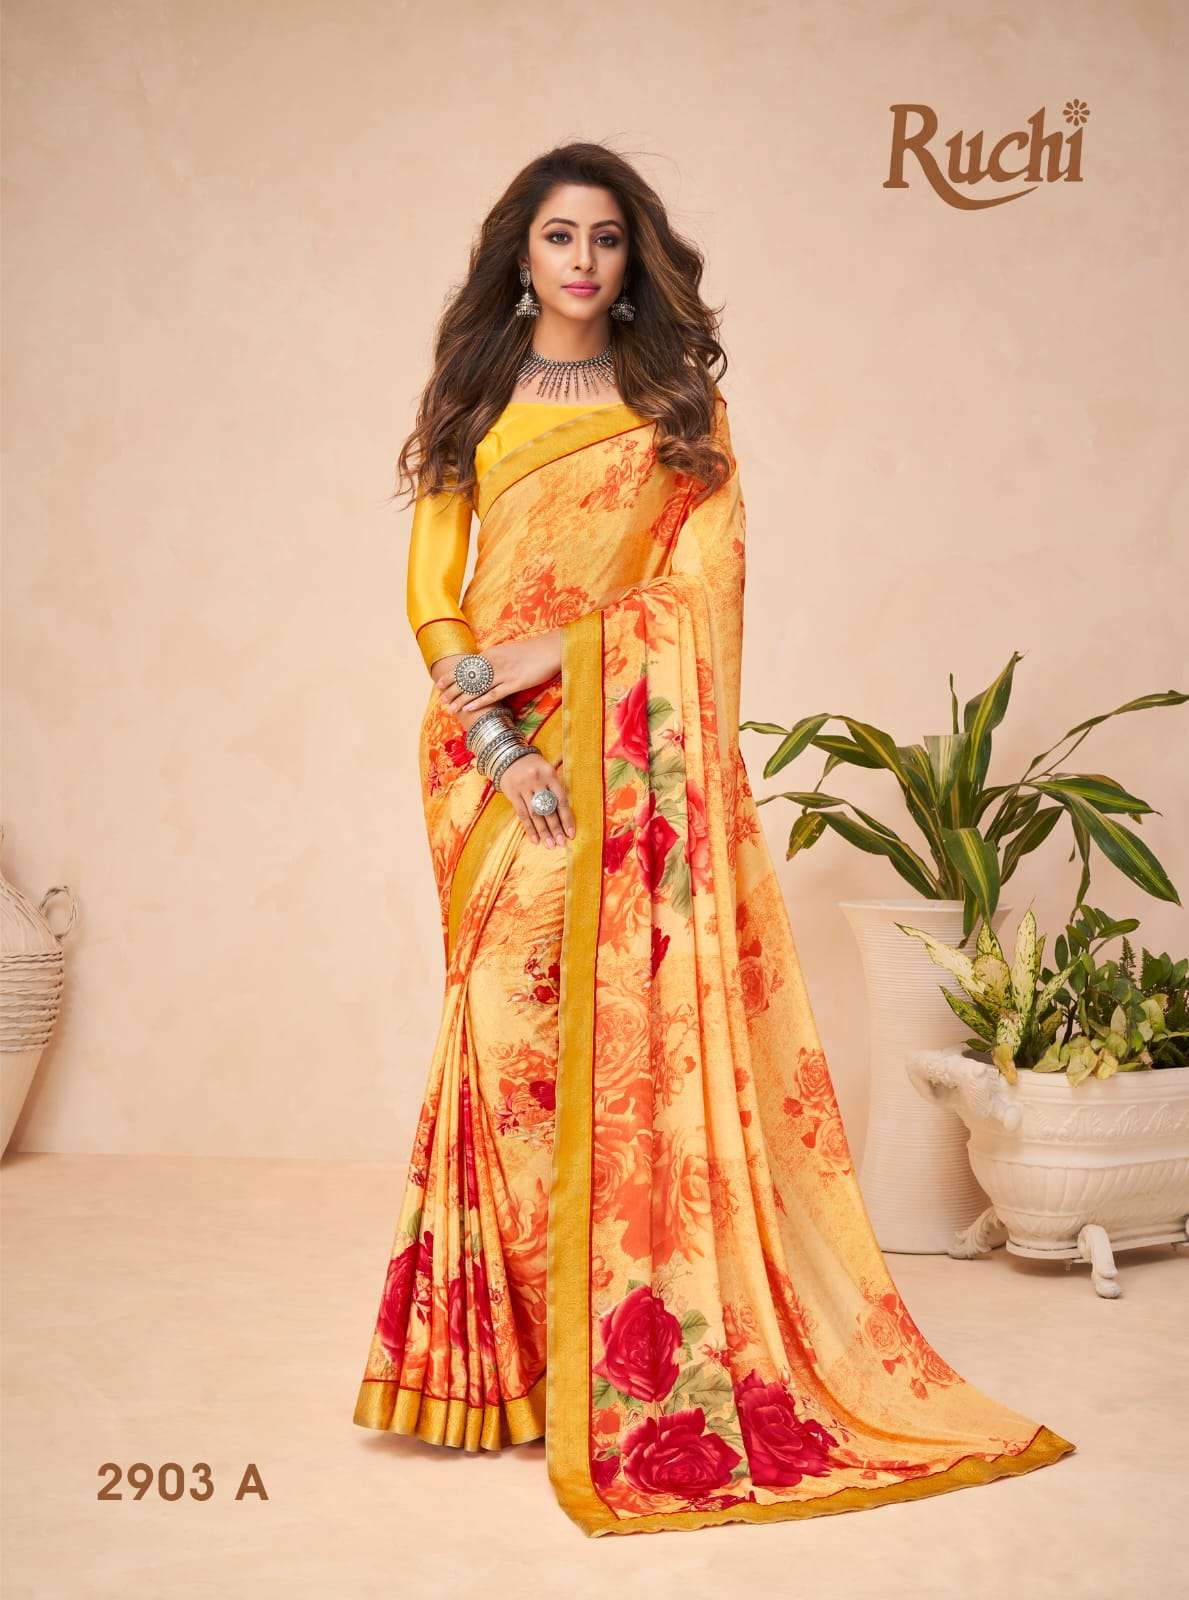 RUCHI GOLDEN TOUCH SATTIN CREPE WITH DIGITAL PRINT SAREE COL...